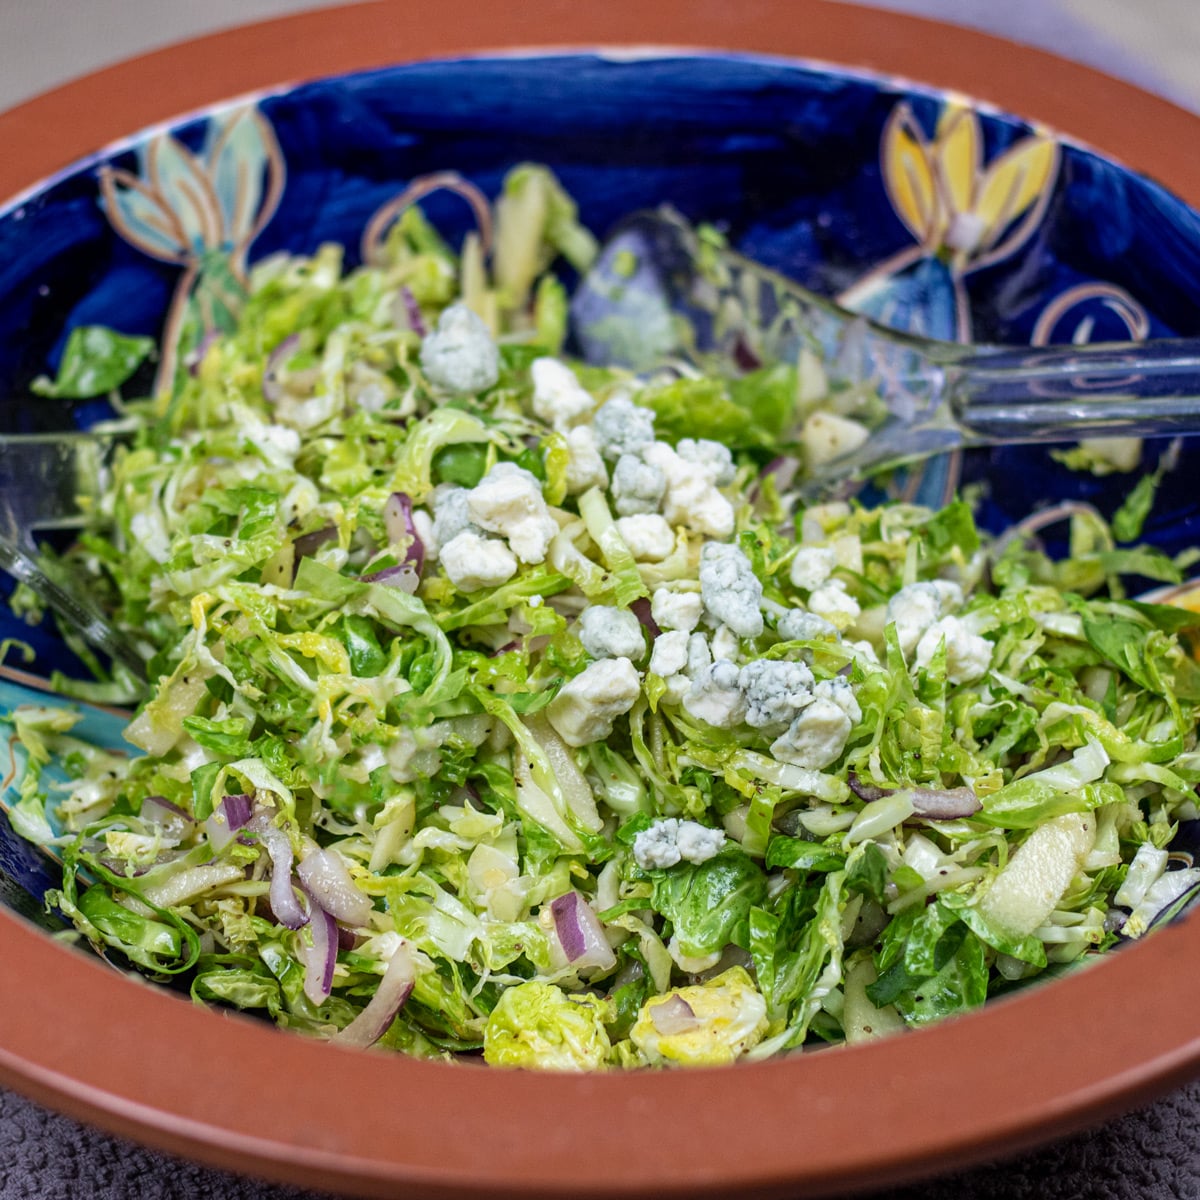 brussels sprouts coleslaw with blue cheese in a blue and brown bowl with salad tings